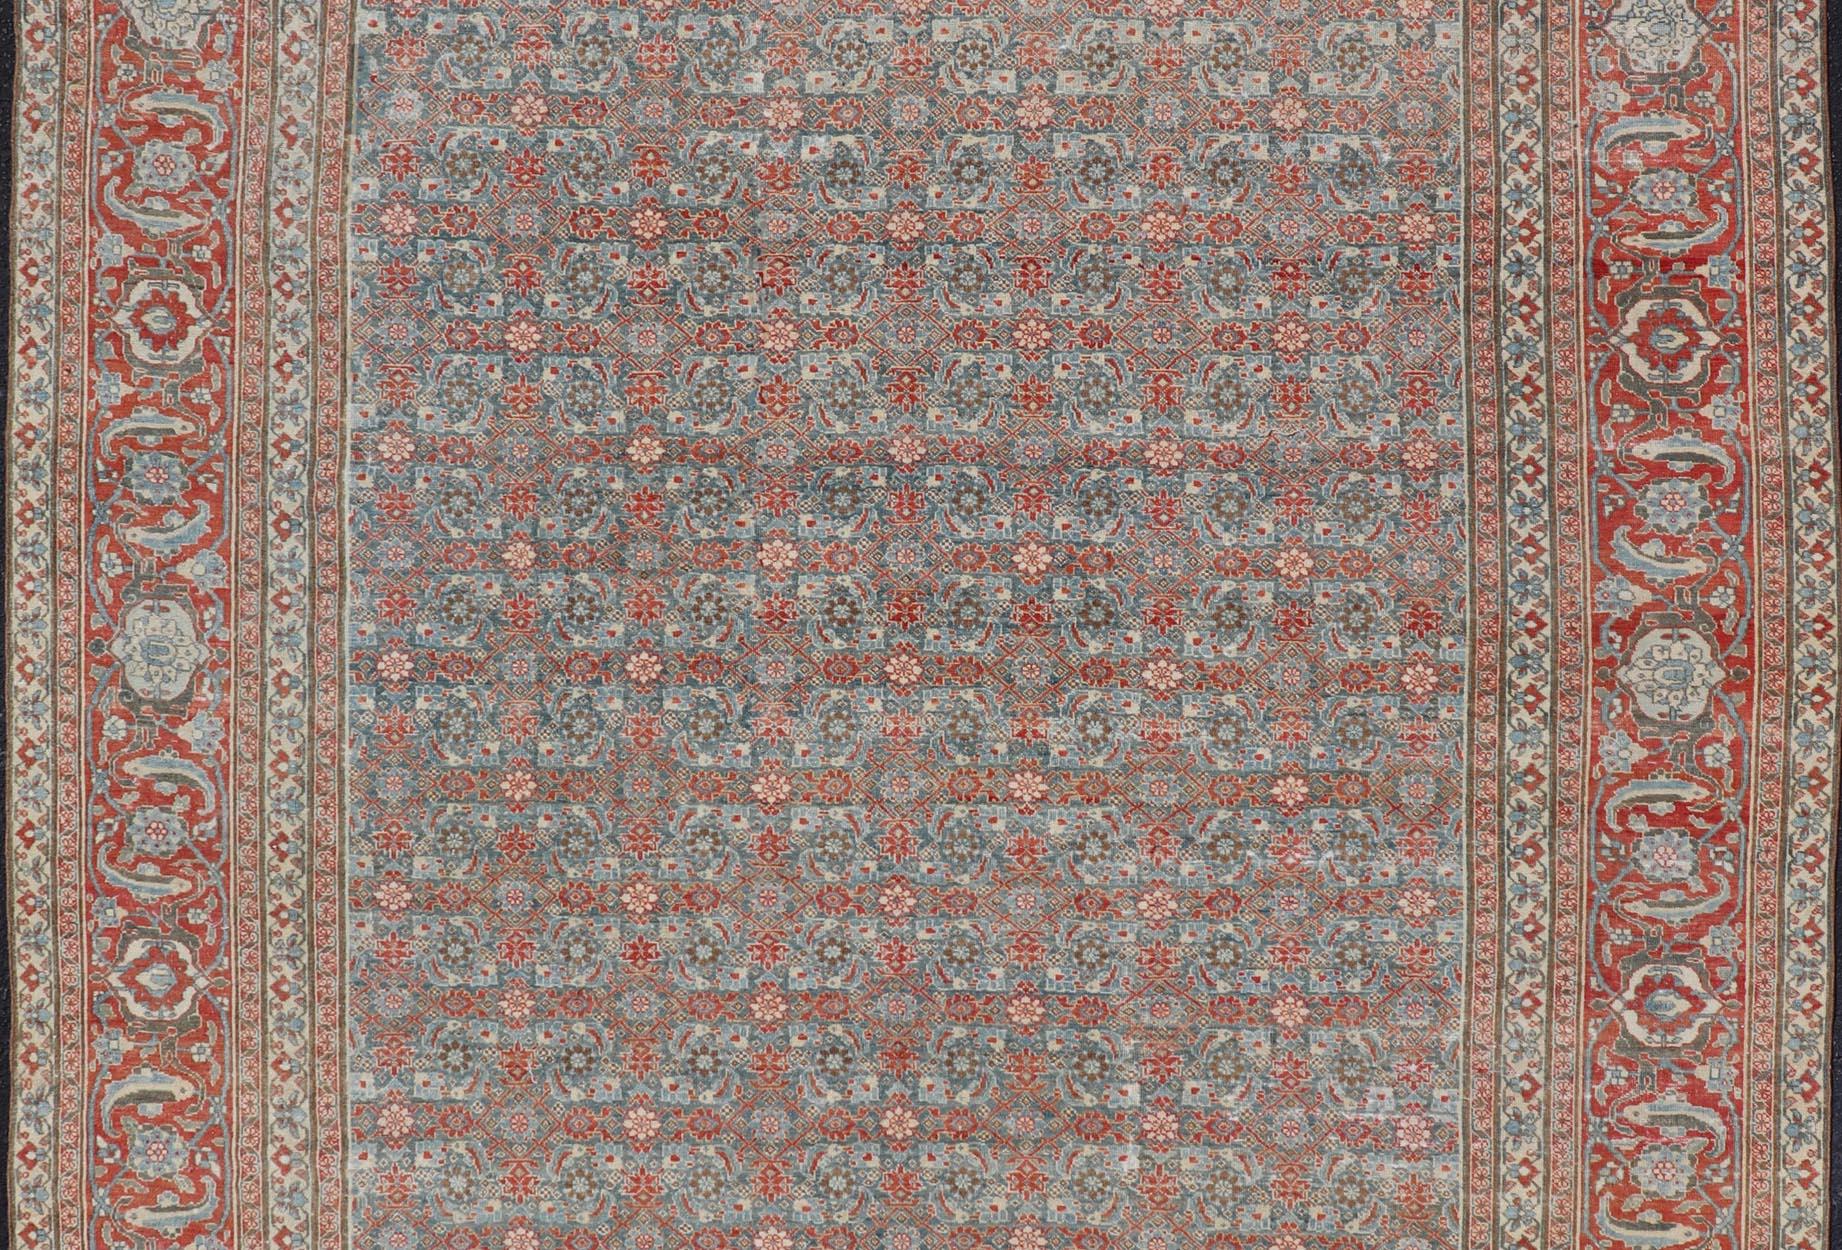 Antique Persian Fine Weave Senneh Rug with All-Over Herati Design on Blue Field. Keivan Woven Arts / rug V21-0305, country of origin / type: Iran / Senneh, circa 1920. 
Measures: 8'3 x 10'5 
This incredible antique distressed Persian Senneh rug